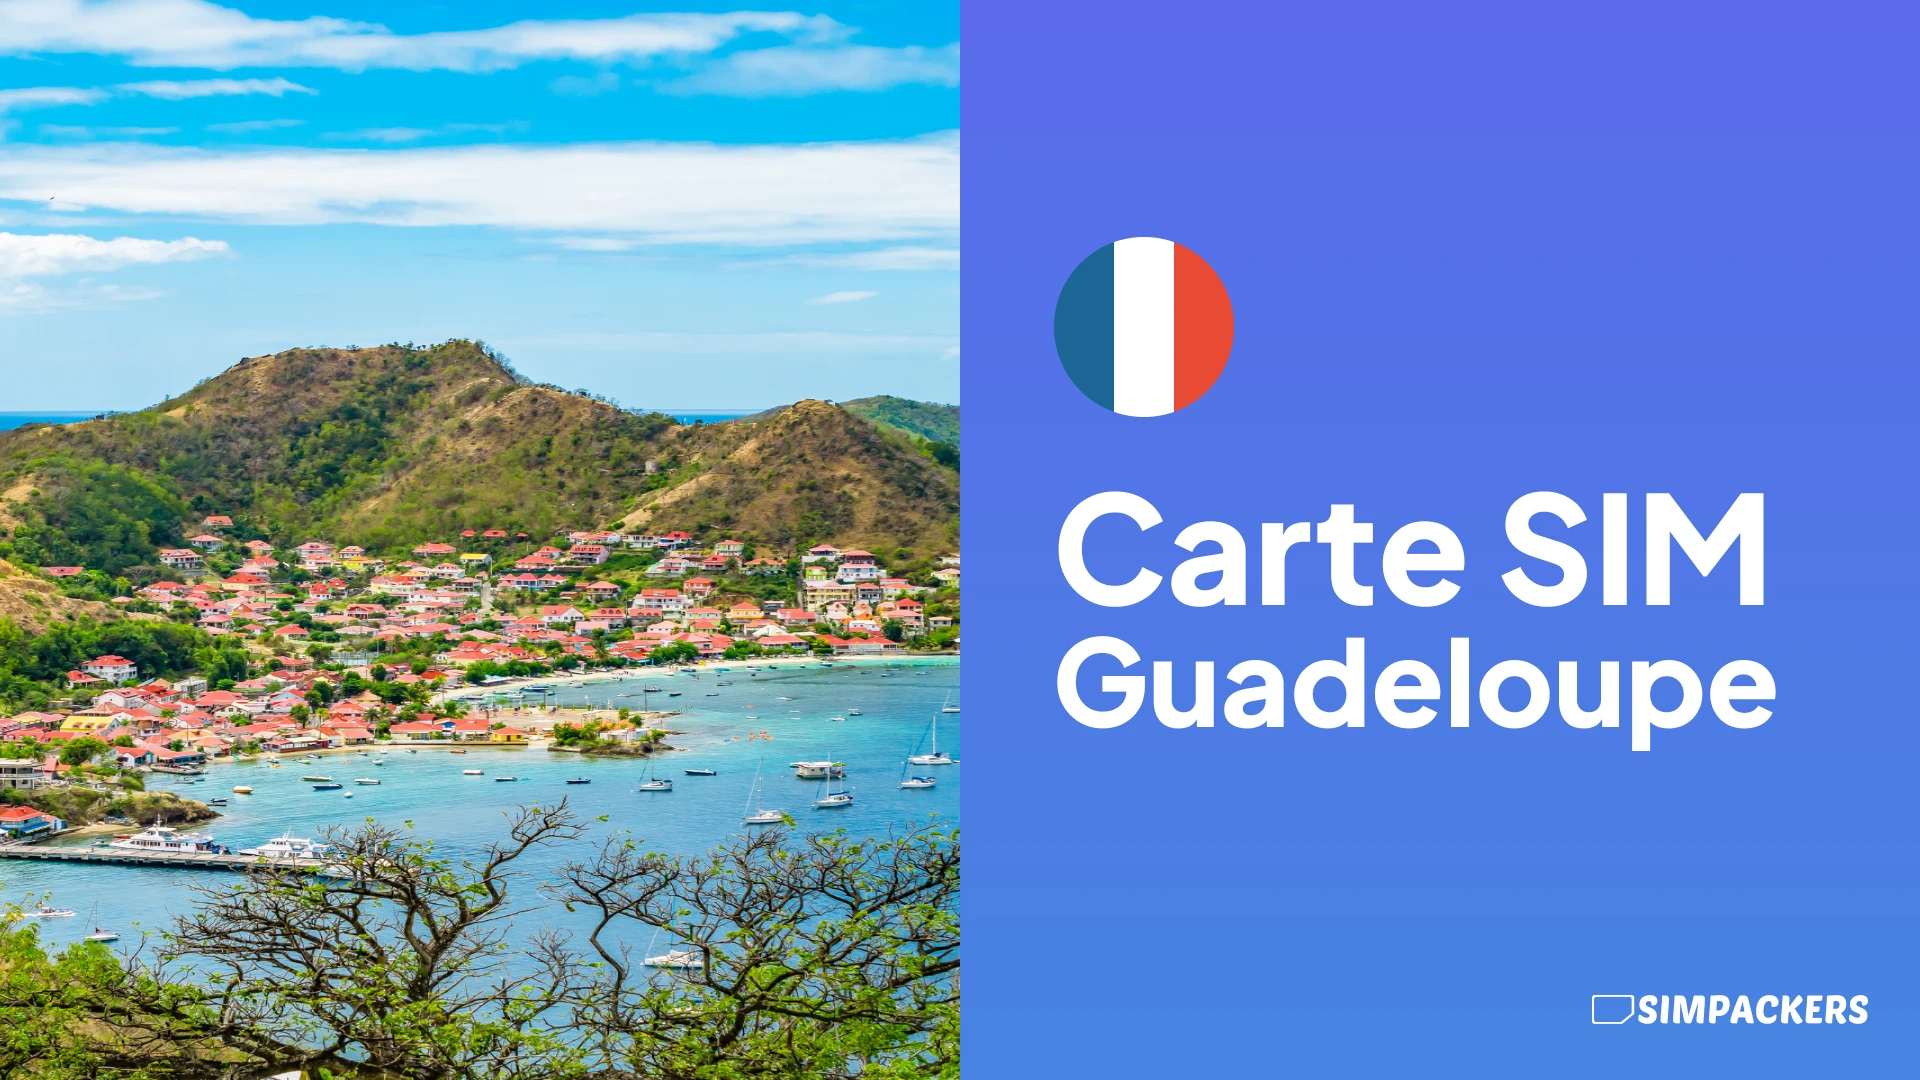 FR/FEATURED_IMAGES/carte-sim-guadeloupe.webp